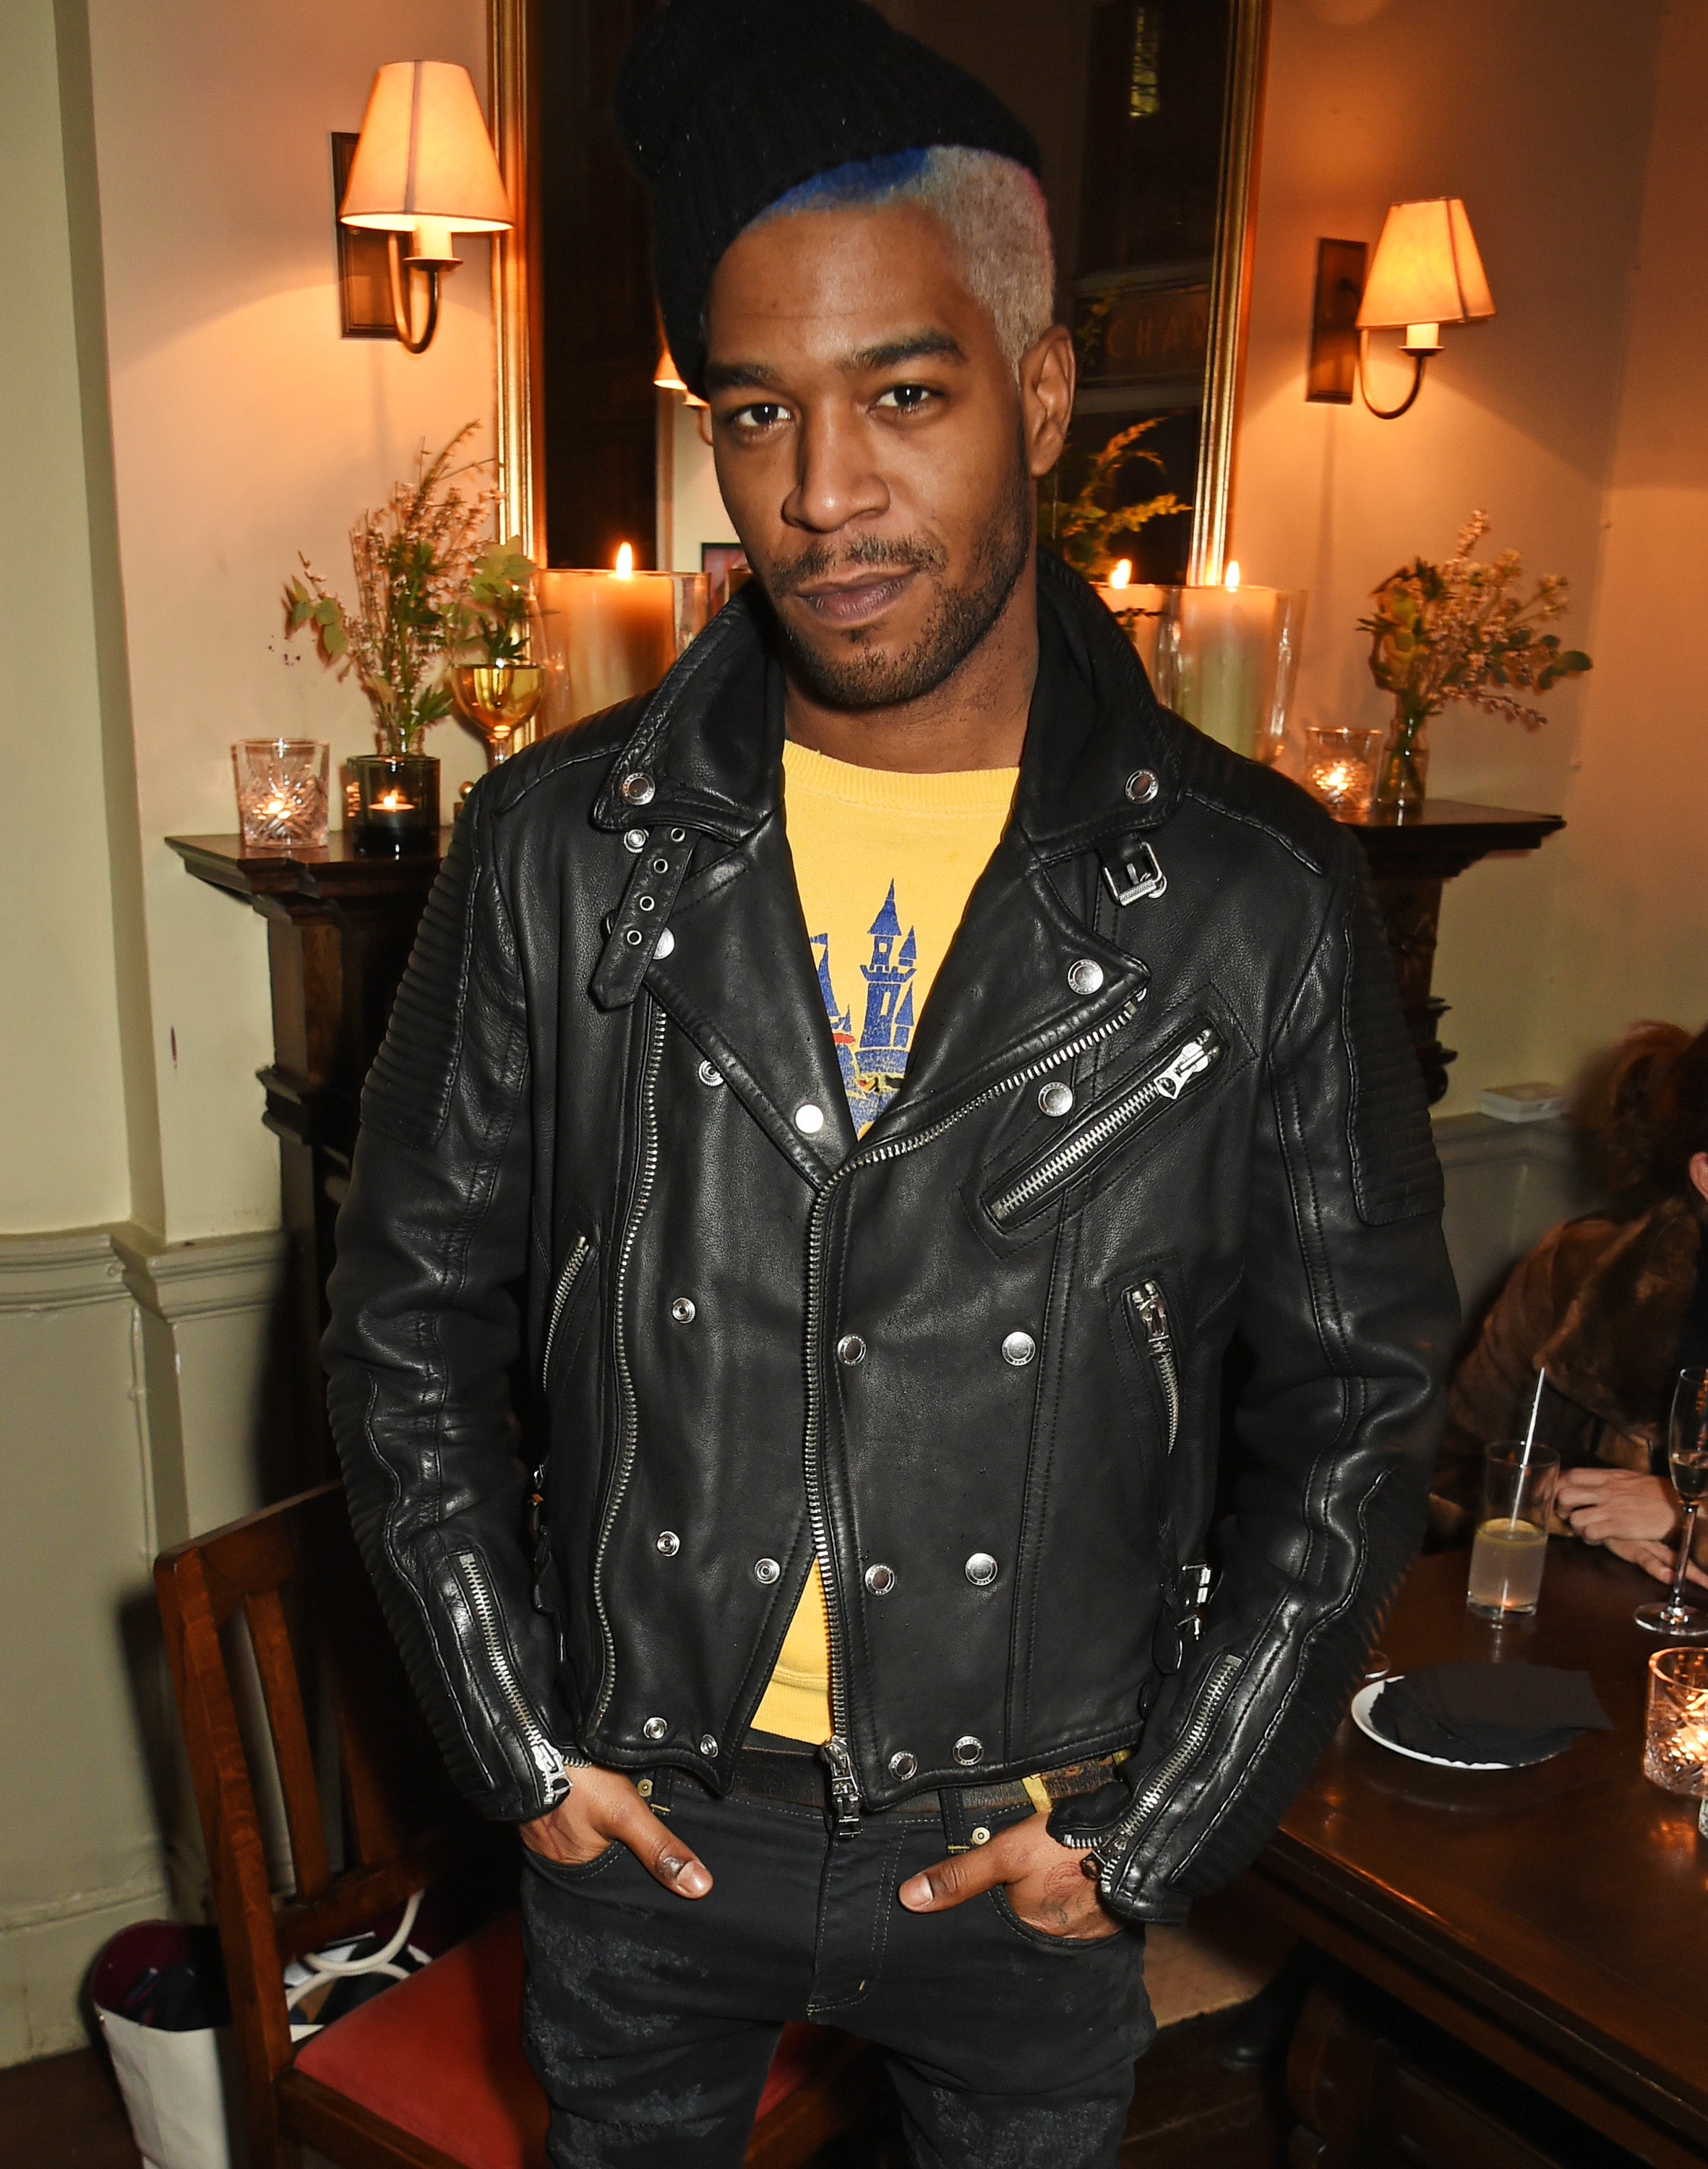 Kid Cudi Reveals Struggle With Depression And Suicidal Thoughts; Checks Into Rehab
